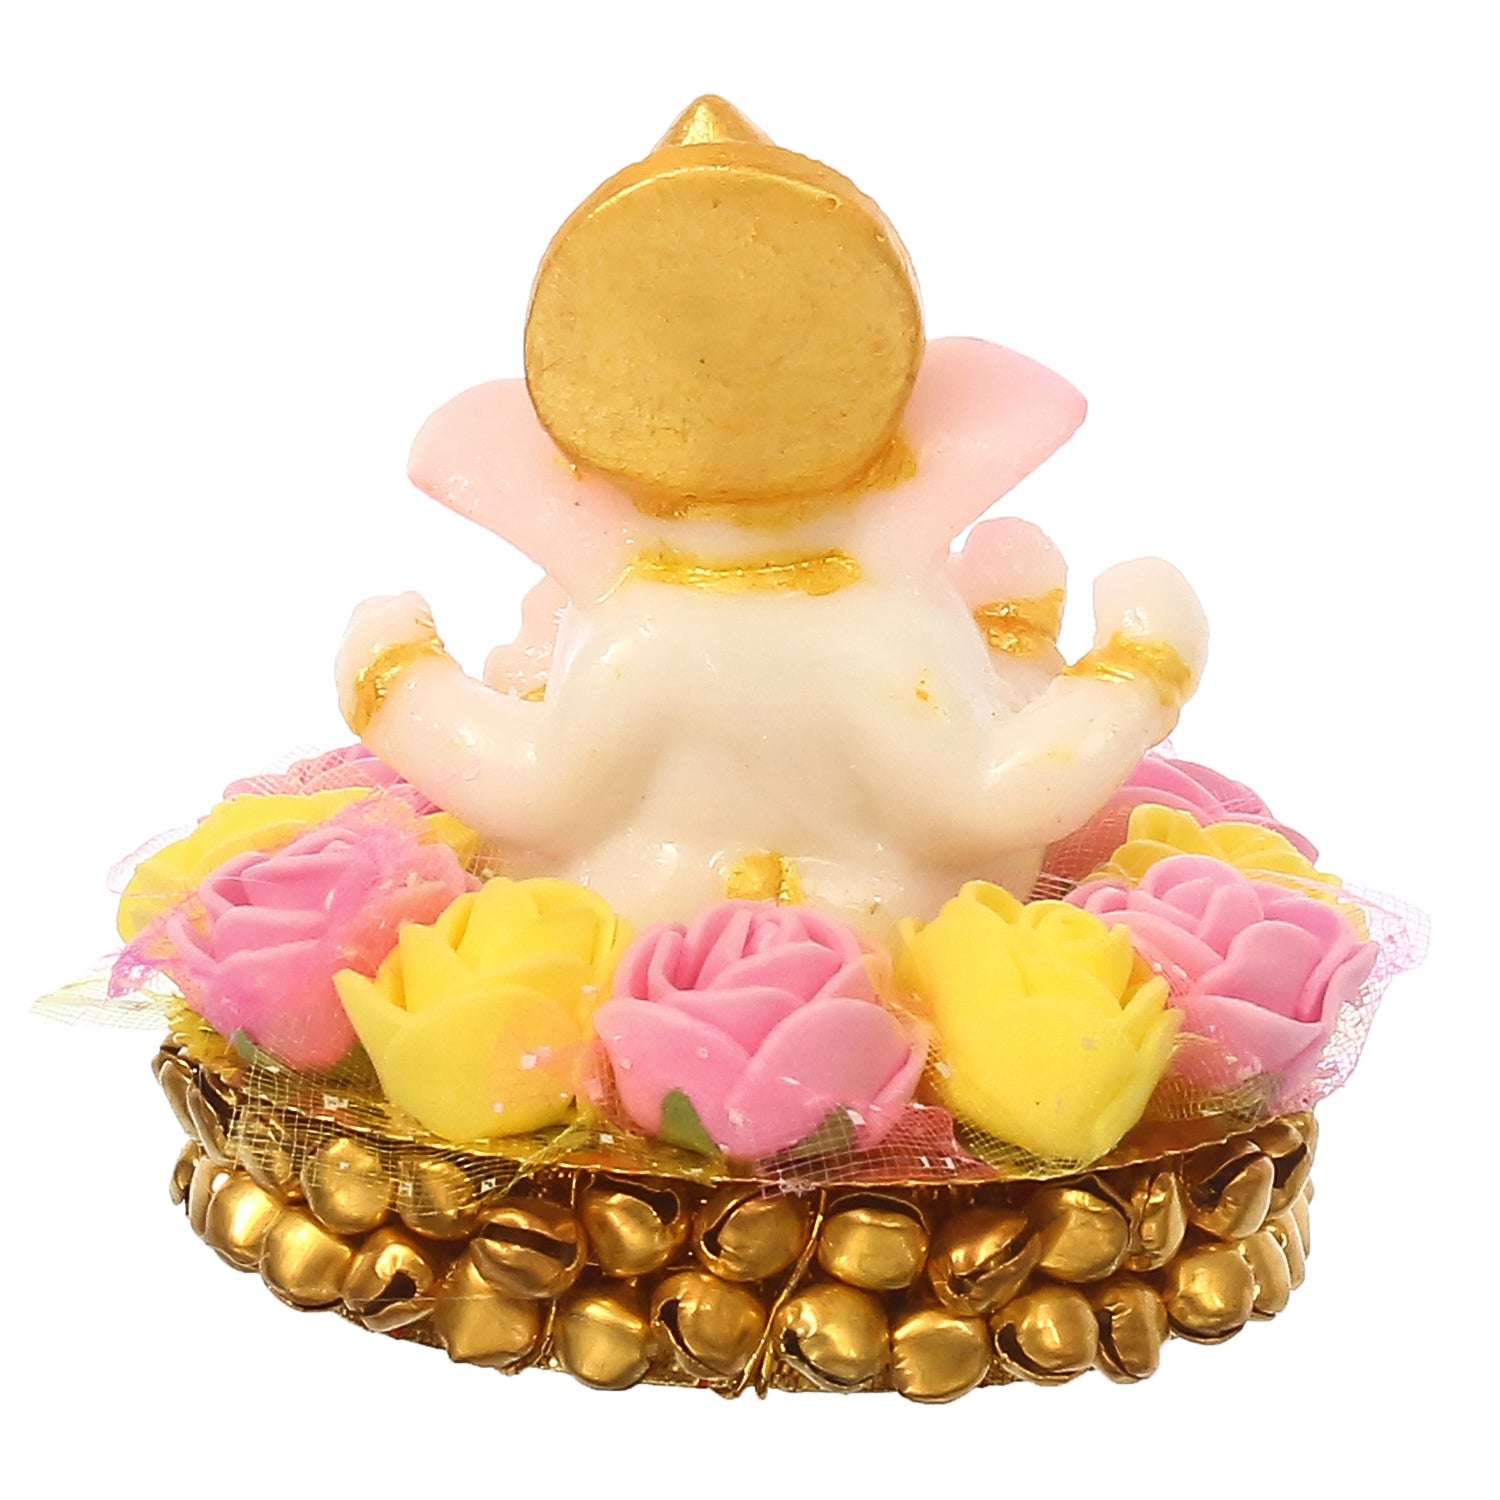 Golden and White Polyresin Lord Ganesha Idol on Decorative Handcrafted Plate with Pink and Yellow Flowers 6